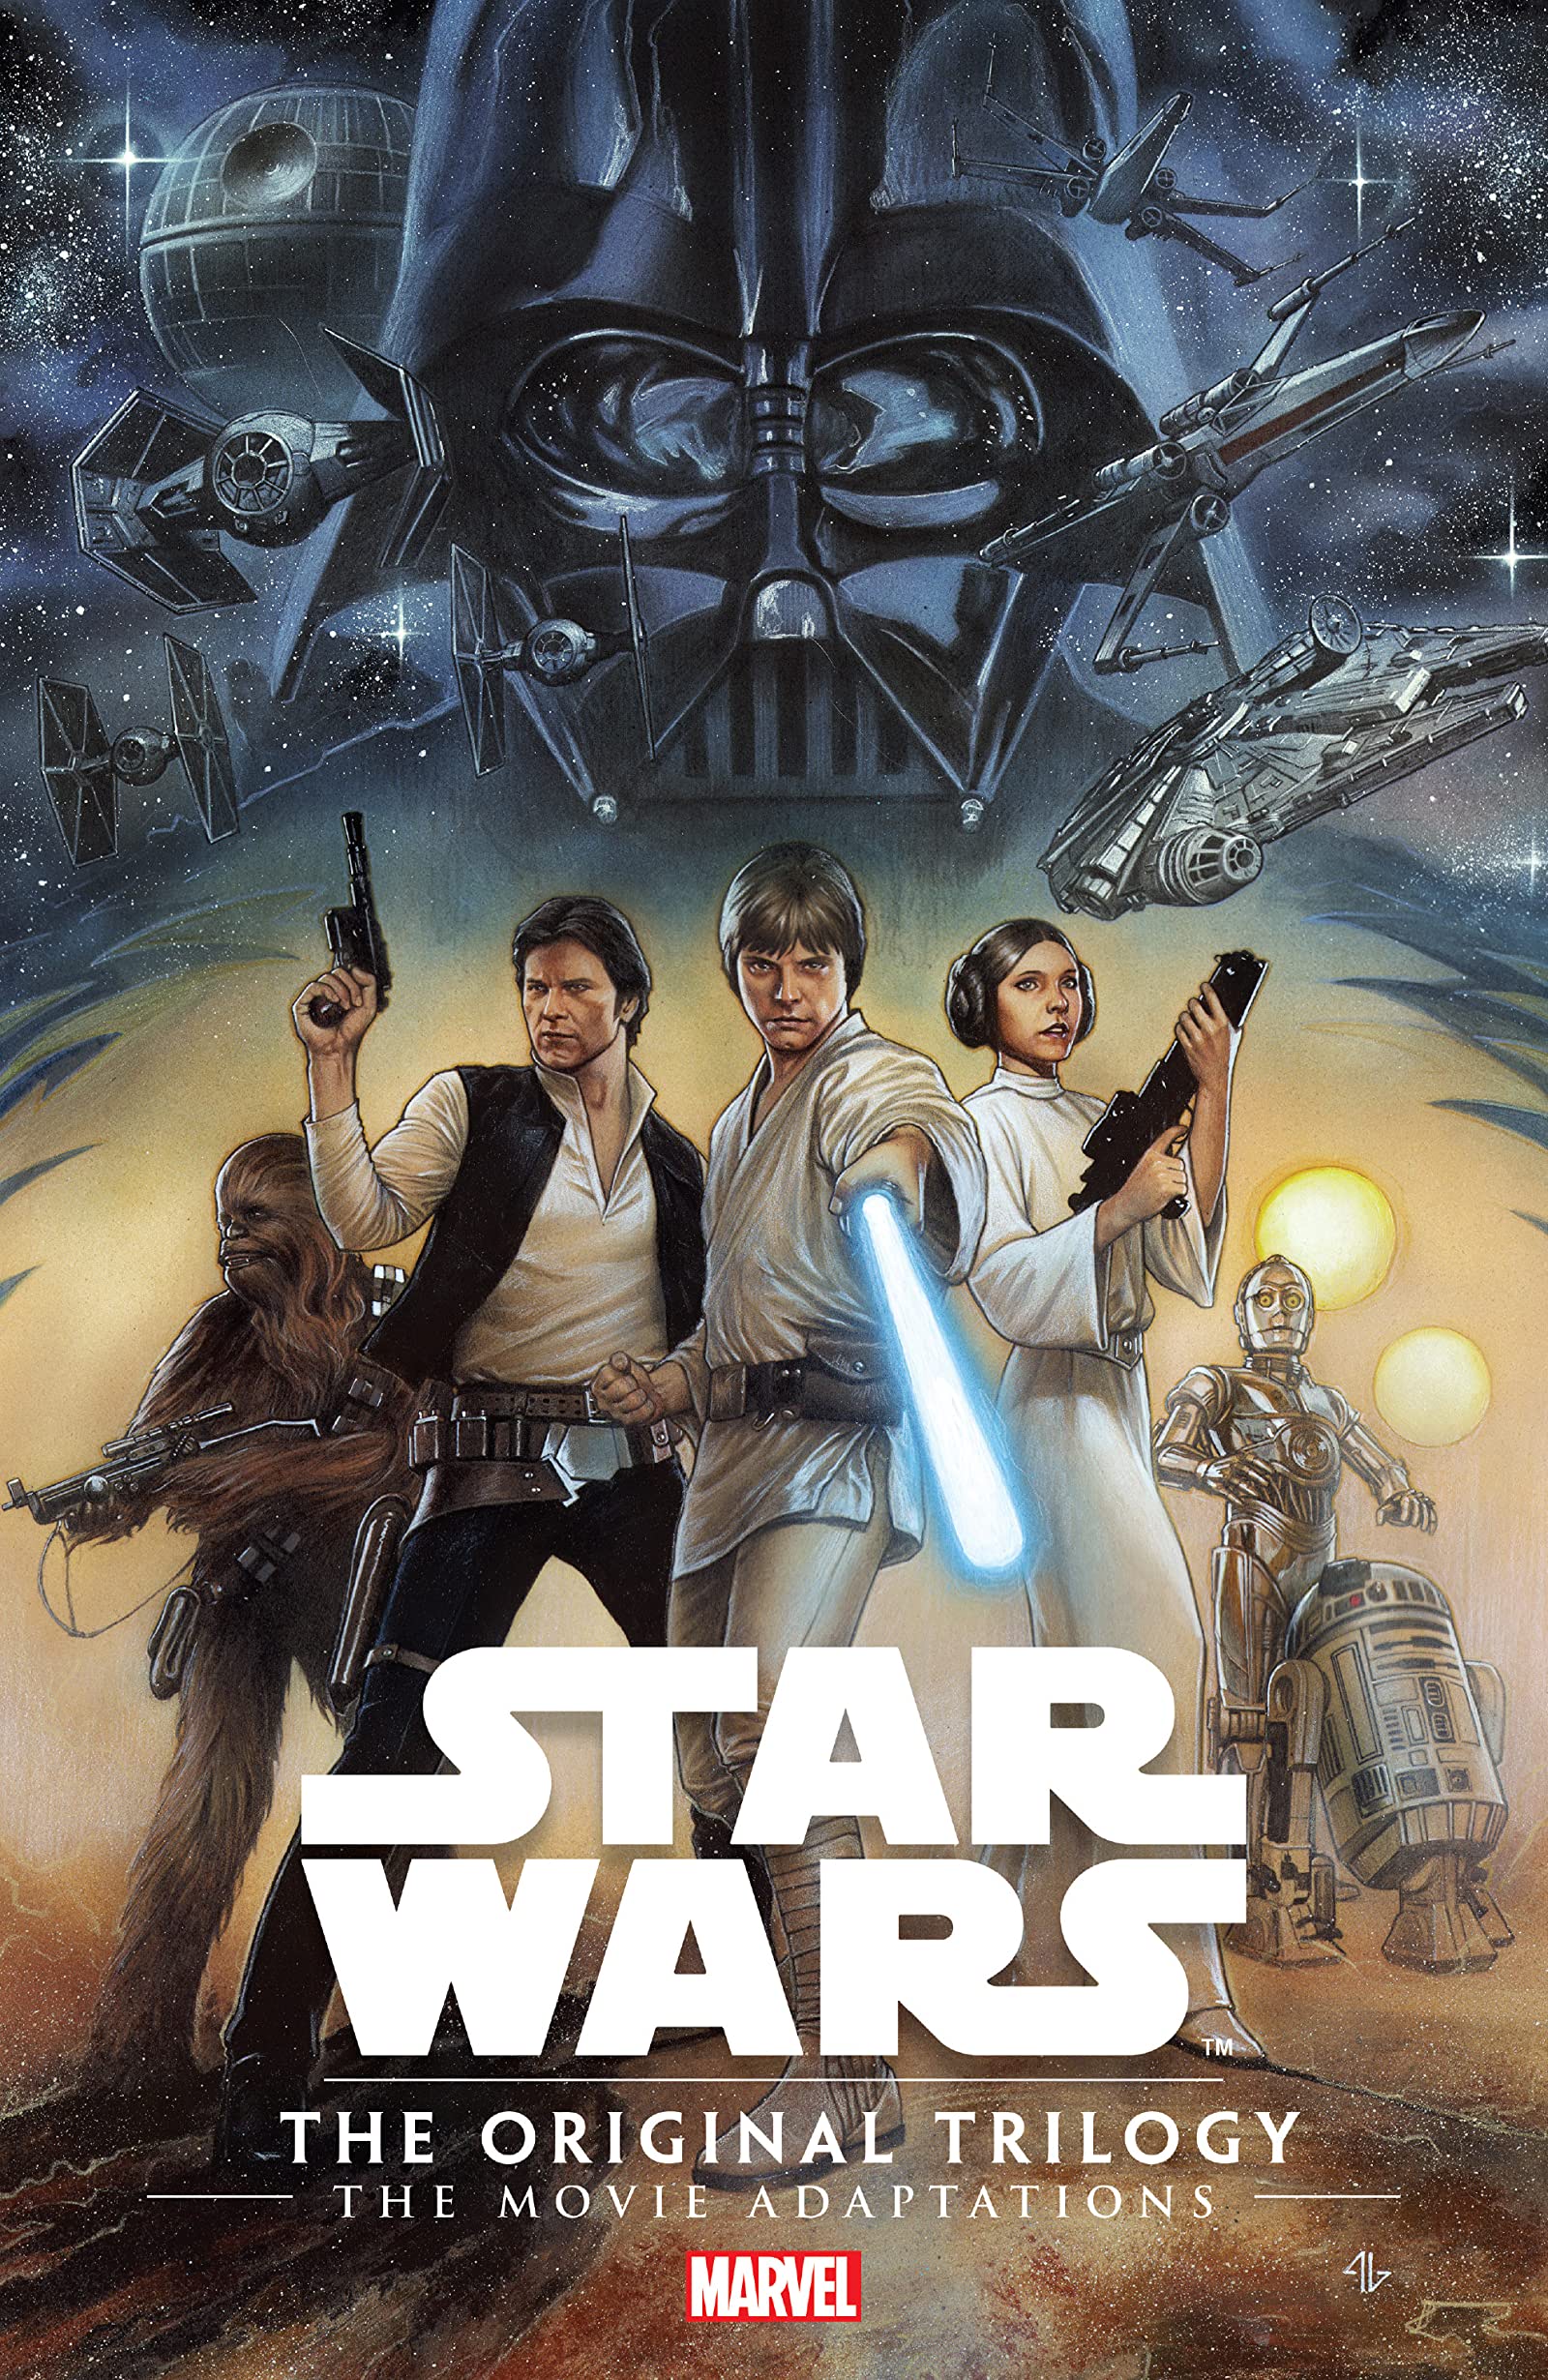 Star Wars – The Original Trilogy – The Movie Adaptations